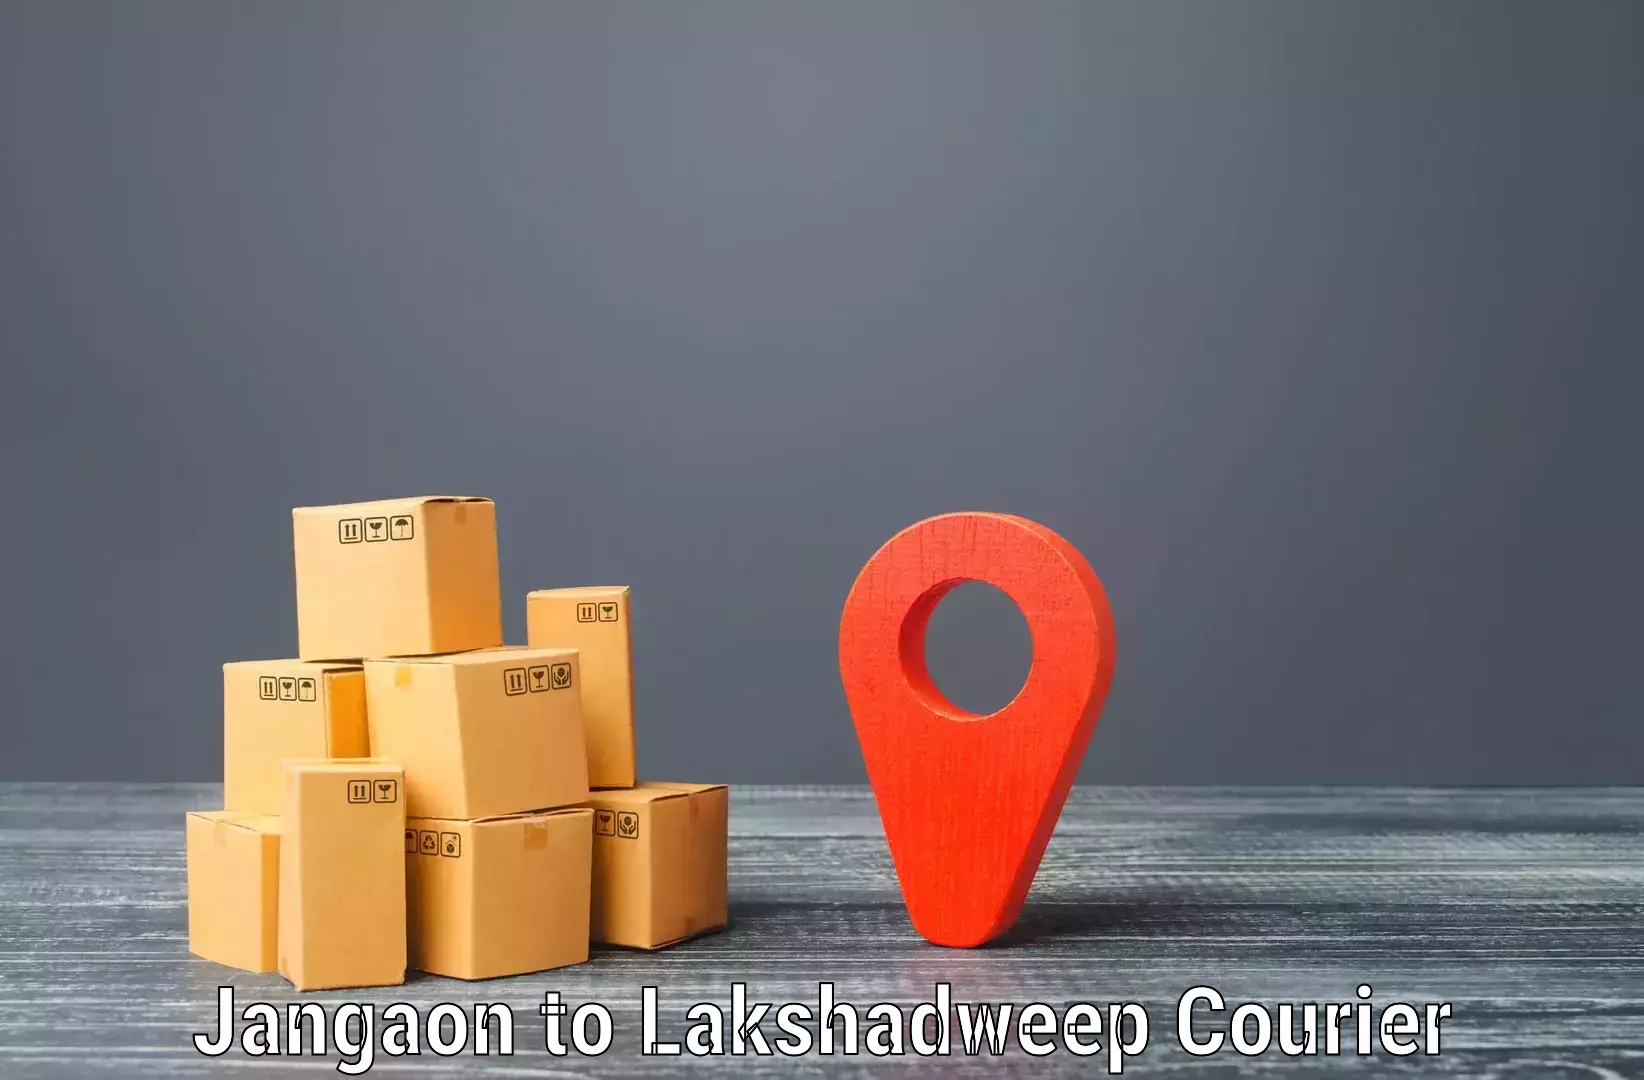 Reliable delivery network Jangaon to Lakshadweep